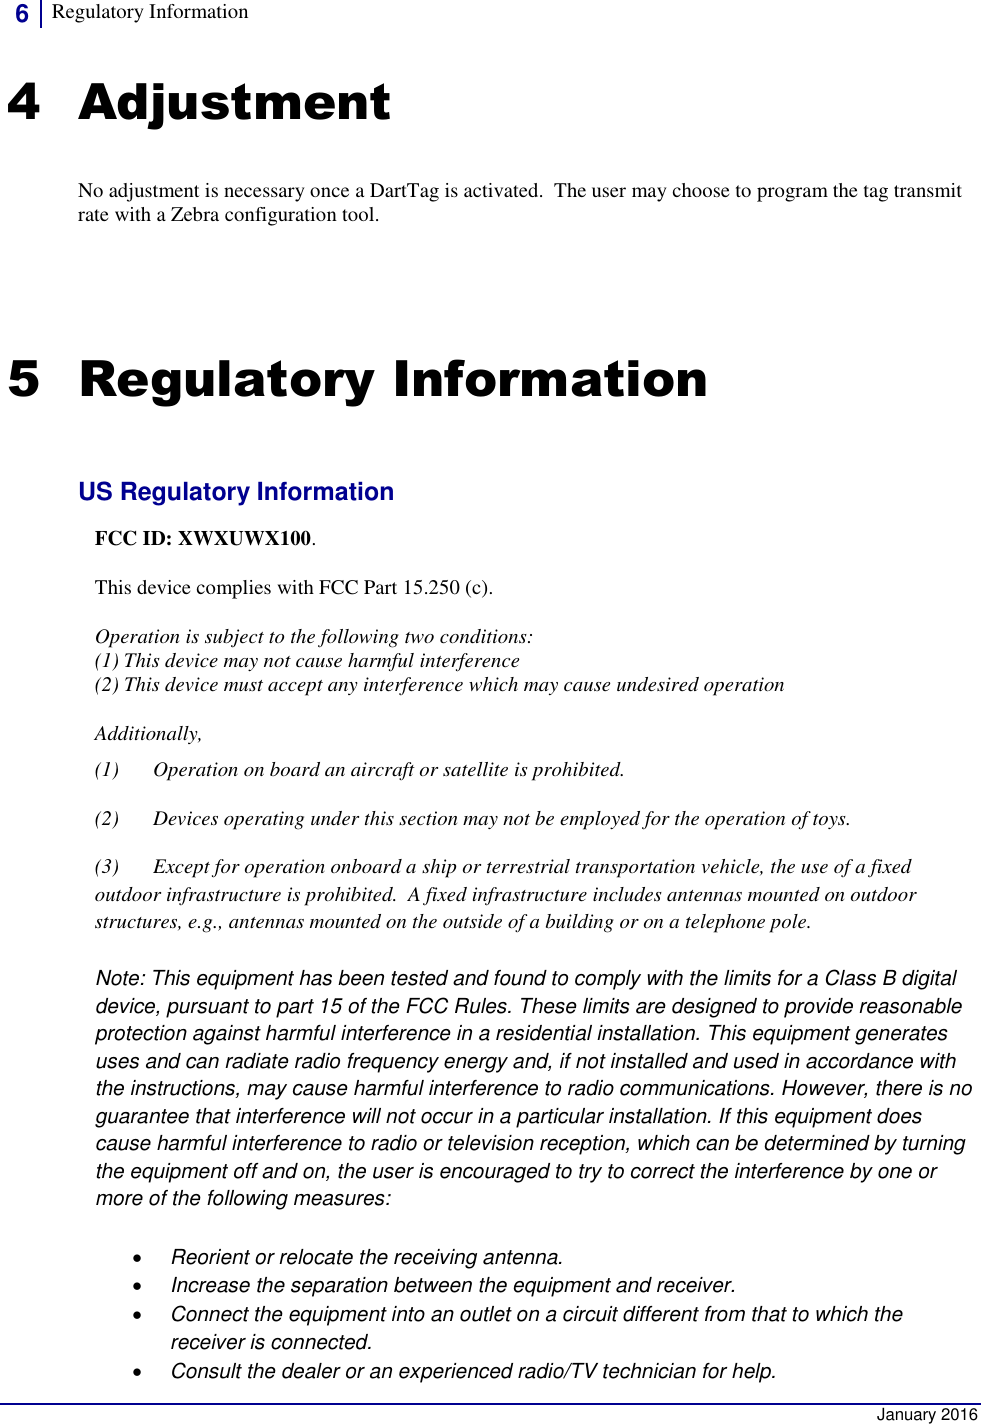 6 Regulatory Information      January 2016 4 Adjustment No adjustment is necessary once a DartTag is activated.  The user may choose to program the tag transmit rate with a Zebra configuration tool. 5 Regulatory Information US Regulatory Information FCC ID: XWXUWX100. This device complies with FCC Part 15.250 (c).  Operation is subject to the following two conditions:  (1) This device may not cause harmful interference  (2) This device must accept any interference which may cause undesired operation Additionally,  (1) Operation on board an aircraft or satellite is prohibited. (2) Devices operating under this section may not be employed for the operation of toys. (3) Except for operation onboard a ship or terrestrial transportation vehicle, the use of a fixed outdoor infrastructure is prohibited.  A fixed infrastructure includes antennas mounted on outdoor structures, e.g., antennas mounted on the outside of a building or on a telephone pole. Note: This equipment has been tested and found to comply with the limits for a Class B digital device, pursuant to part 15 of the FCC Rules. These limits are designed to provide reasonable protection against harmful interference in a residential installation. This equipment generates uses and can radiate radio frequency energy and, if not installed and used in accordance with the instructions, may cause harmful interference to radio communications. However, there is no guarantee that interference will not occur in a particular installation. If this equipment does cause harmful interference to radio or television reception, which can be determined by turning the equipment off and on, the user is encouraged to try to correct the interference by one or more of the following measures:  Reorient or relocate the receiving antenna.  Increase the separation between the equipment and receiver.  Connect the equipment into an outlet on a circuit different from that to which the receiver is connected.  Consult the dealer or an experienced radio/TV technician for help. 